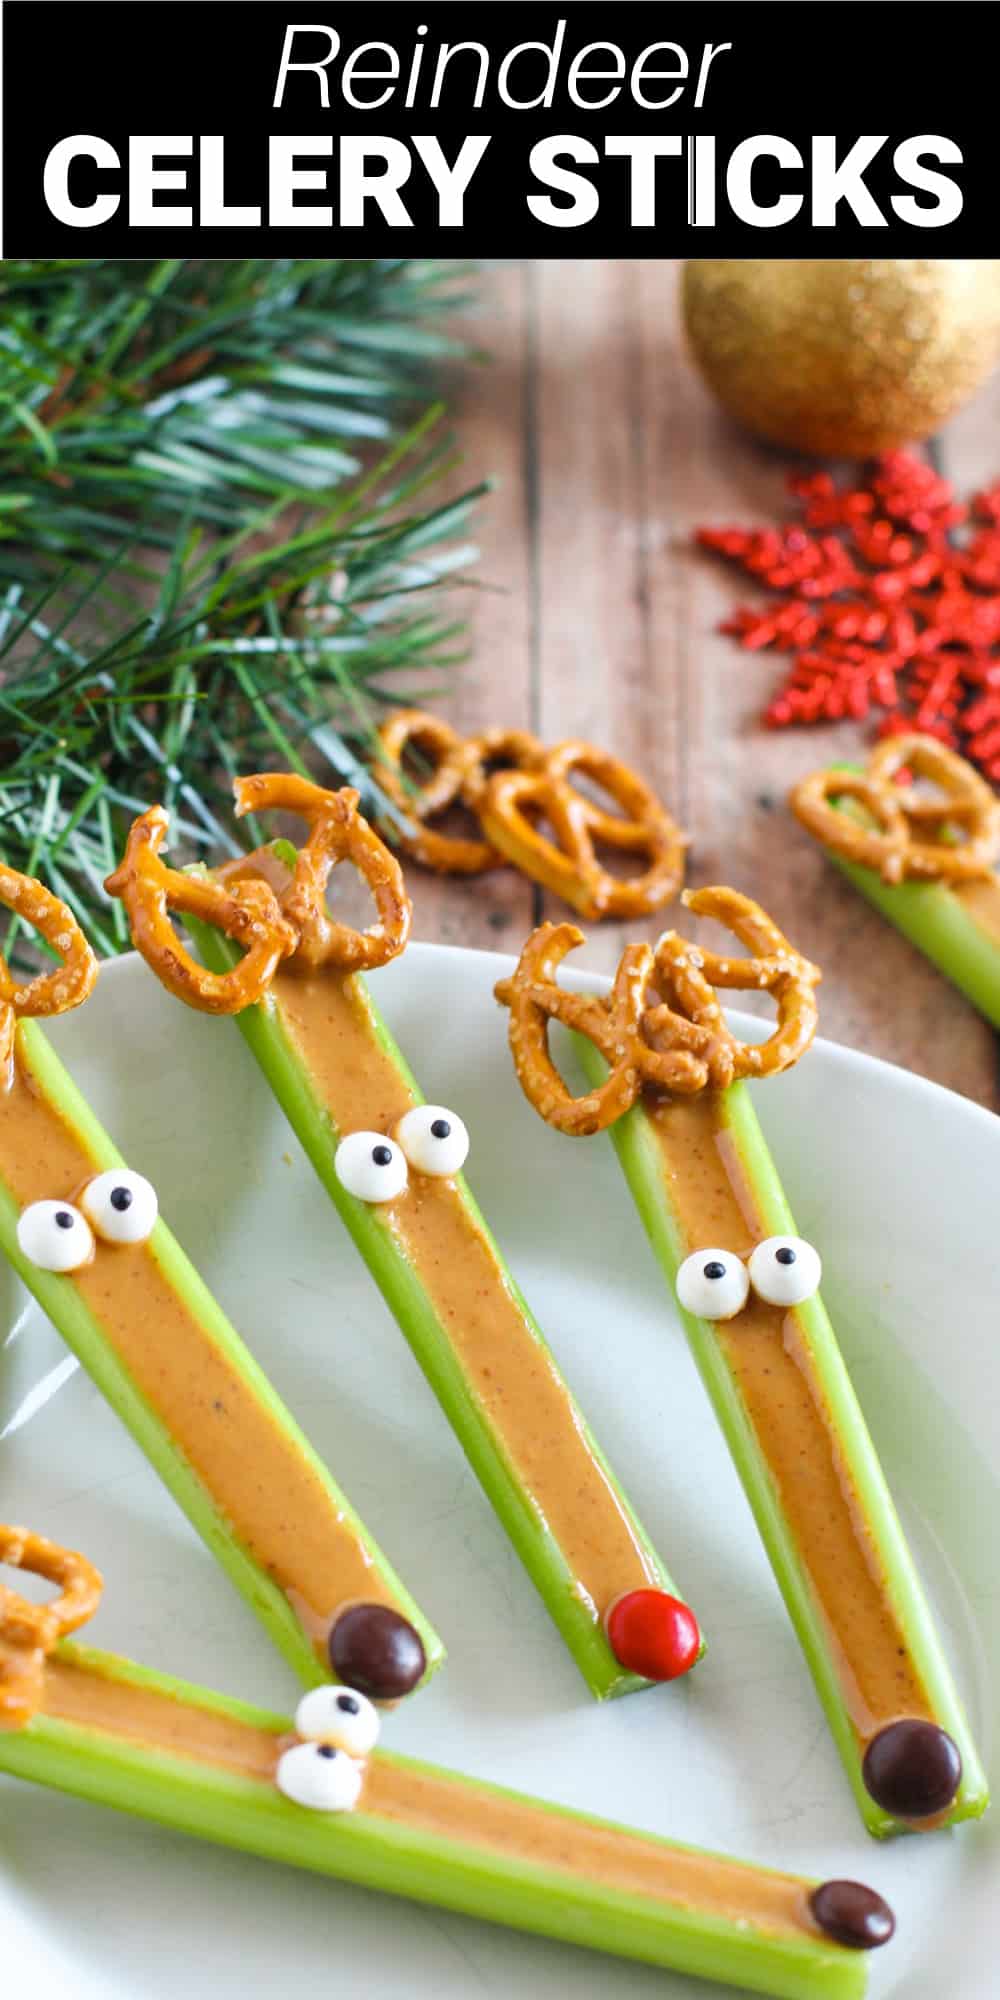 These cute reindeer celery sticks will turn your afternoon snack into a fun holiday treat. Crunchy peanut butter-filled celery sticks are transformed into adorable reindeer with the addition of pretzel antlers, M&M noses, and candy eyes. Getting your kids to eat a healthy snack has never been easier, and they can even help you make it!